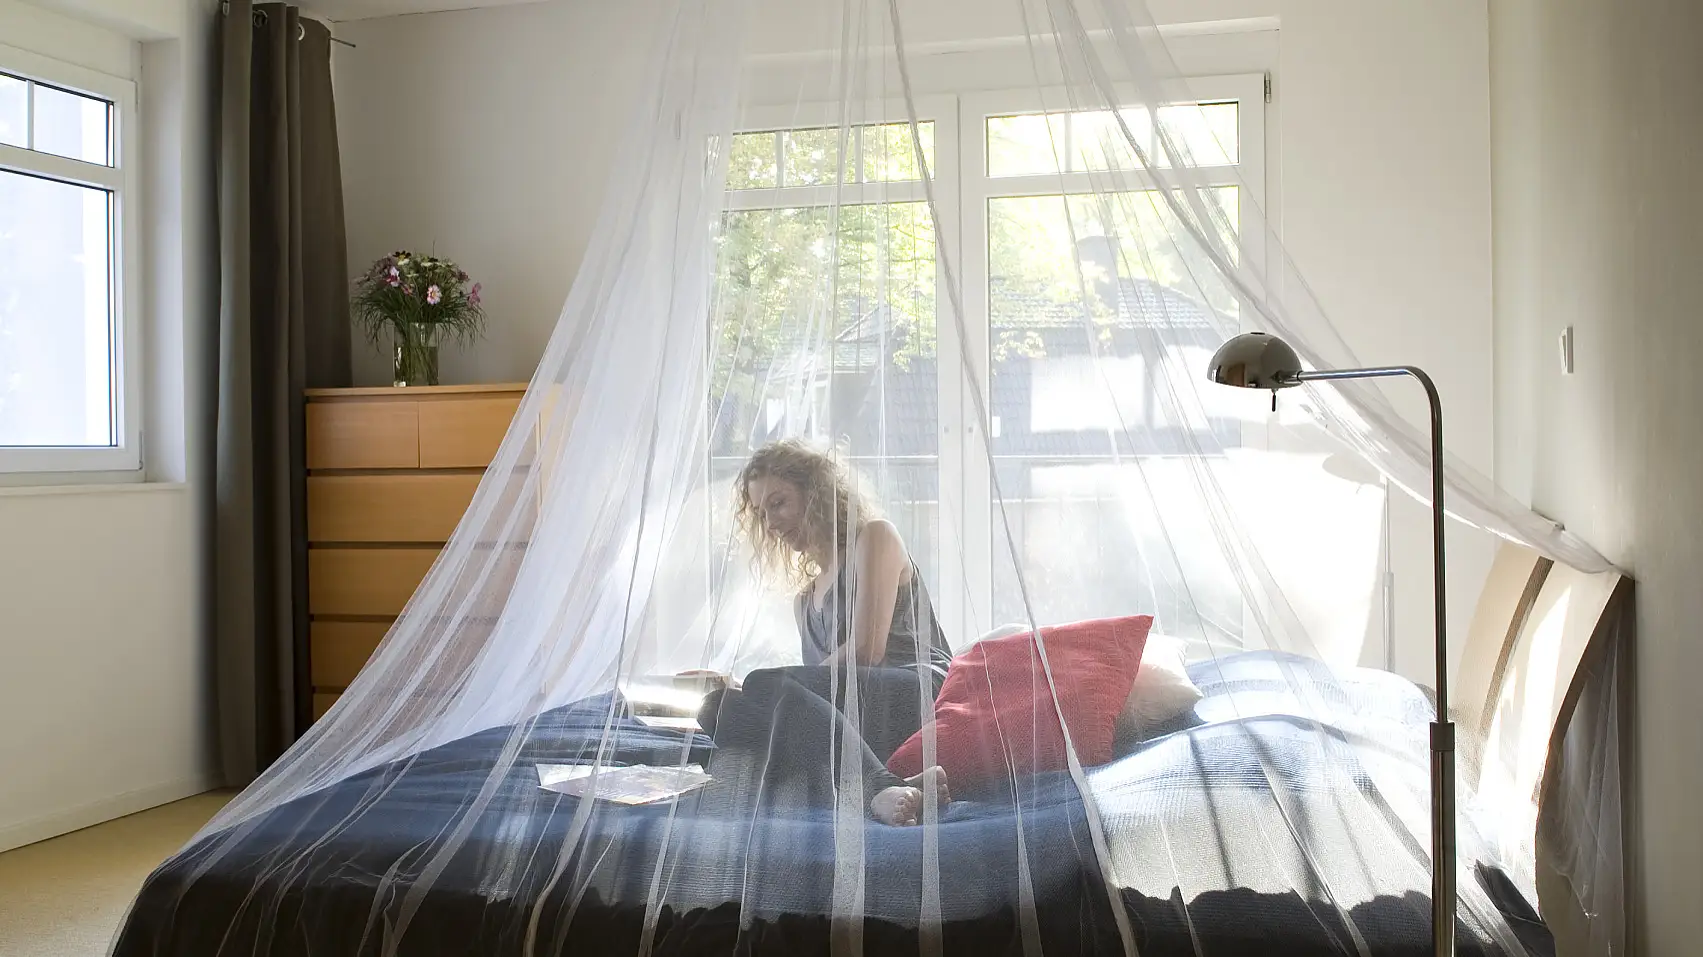 A mosquito net provides insect protection and is attached to the ceiling in the bedroom of your home or while traveling.